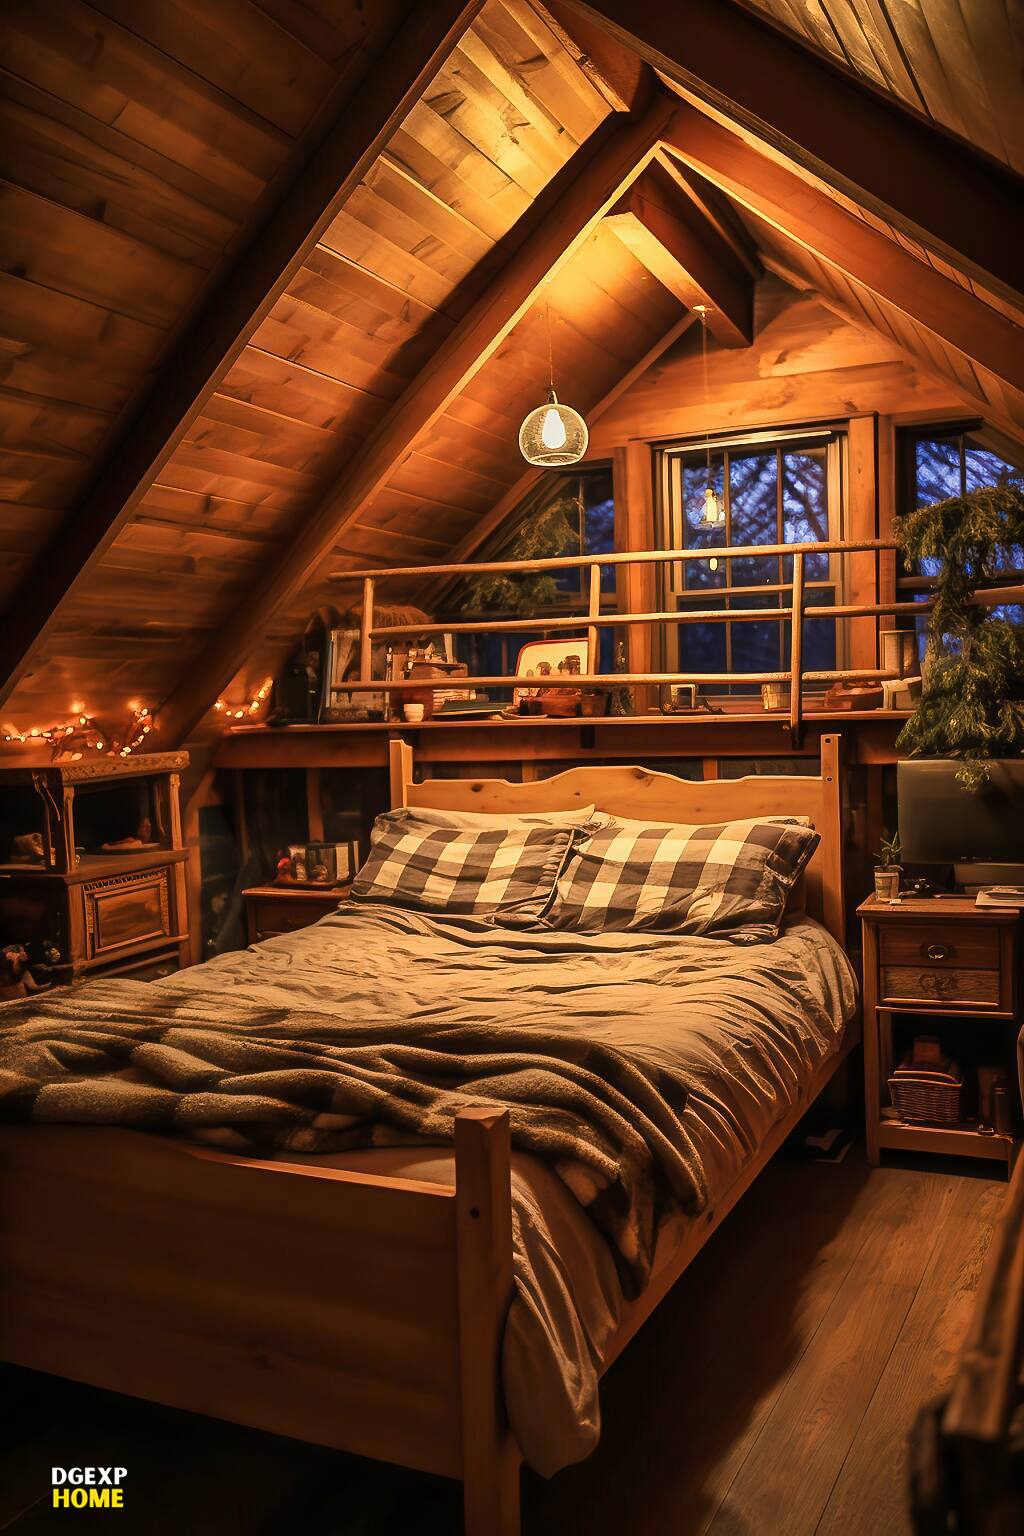 Loft Farmhouse Bedroom With High Wooden Ceilings, Checkered Bedding, And Cozy Lighting